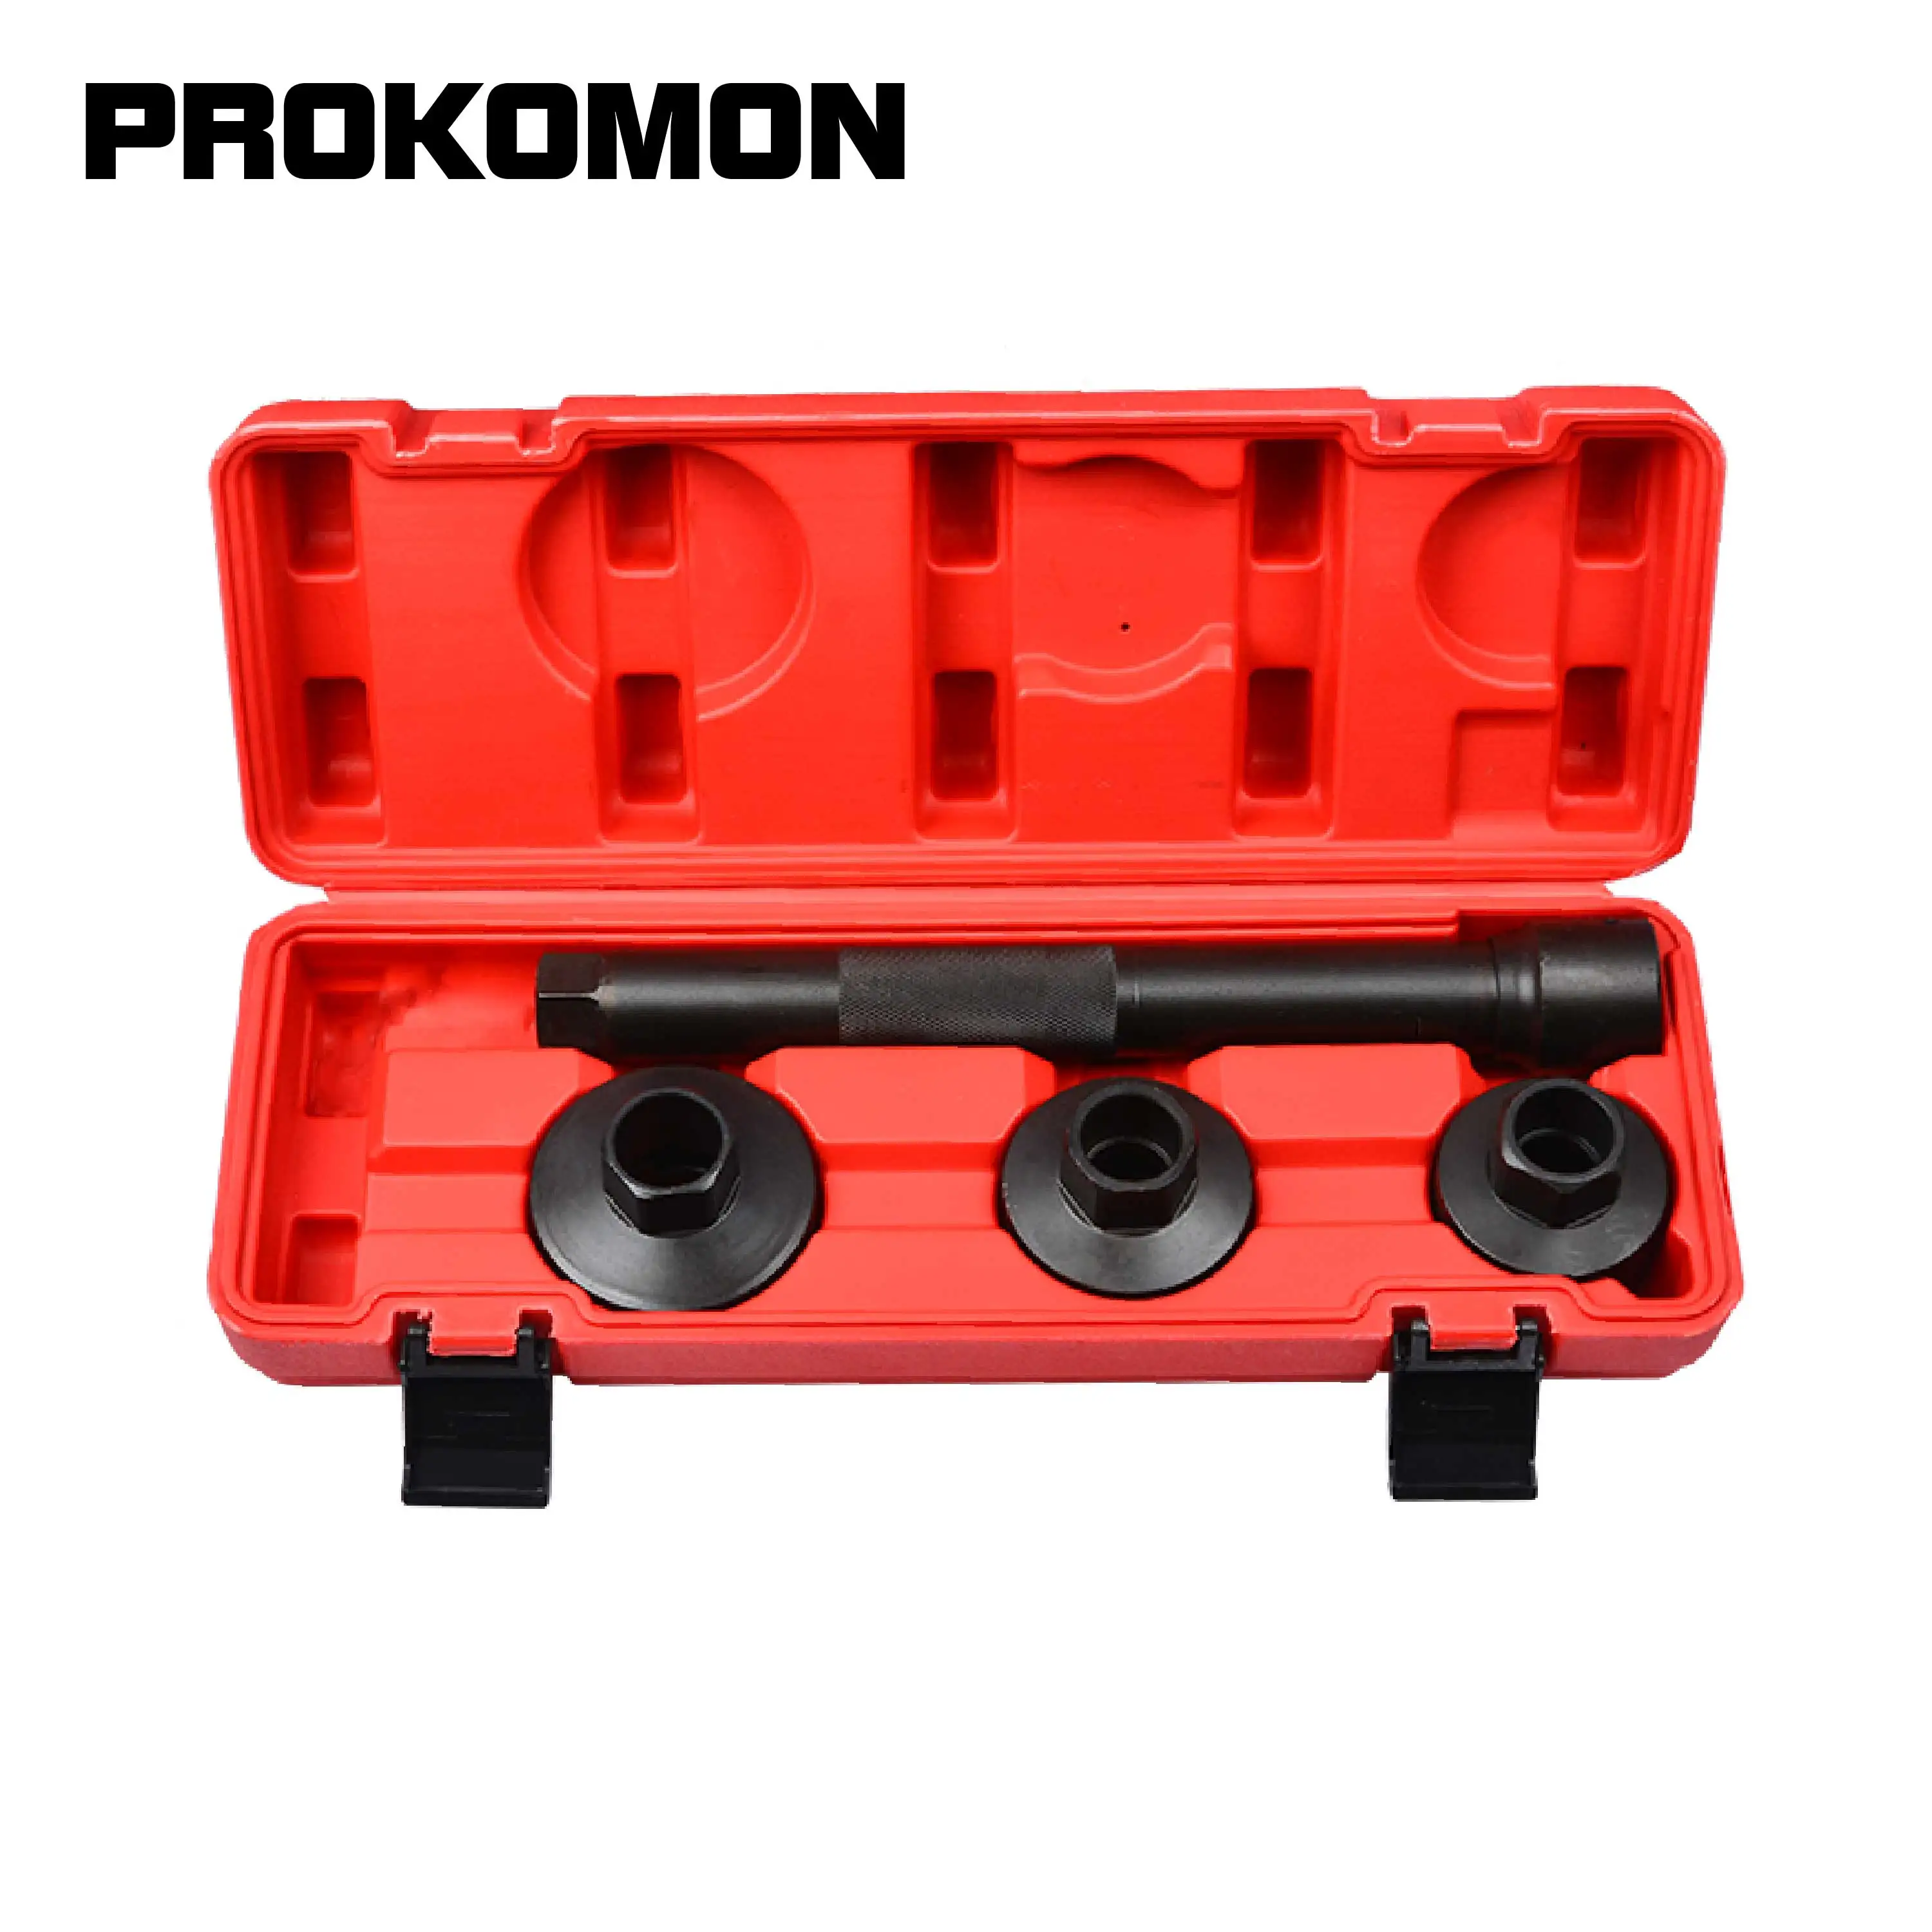 

Prokomon 4PC 30-45mm Track Rod End Axial Joint Removal Tool Automotive steering rack knuckle tie Remover Installer Tool Kit